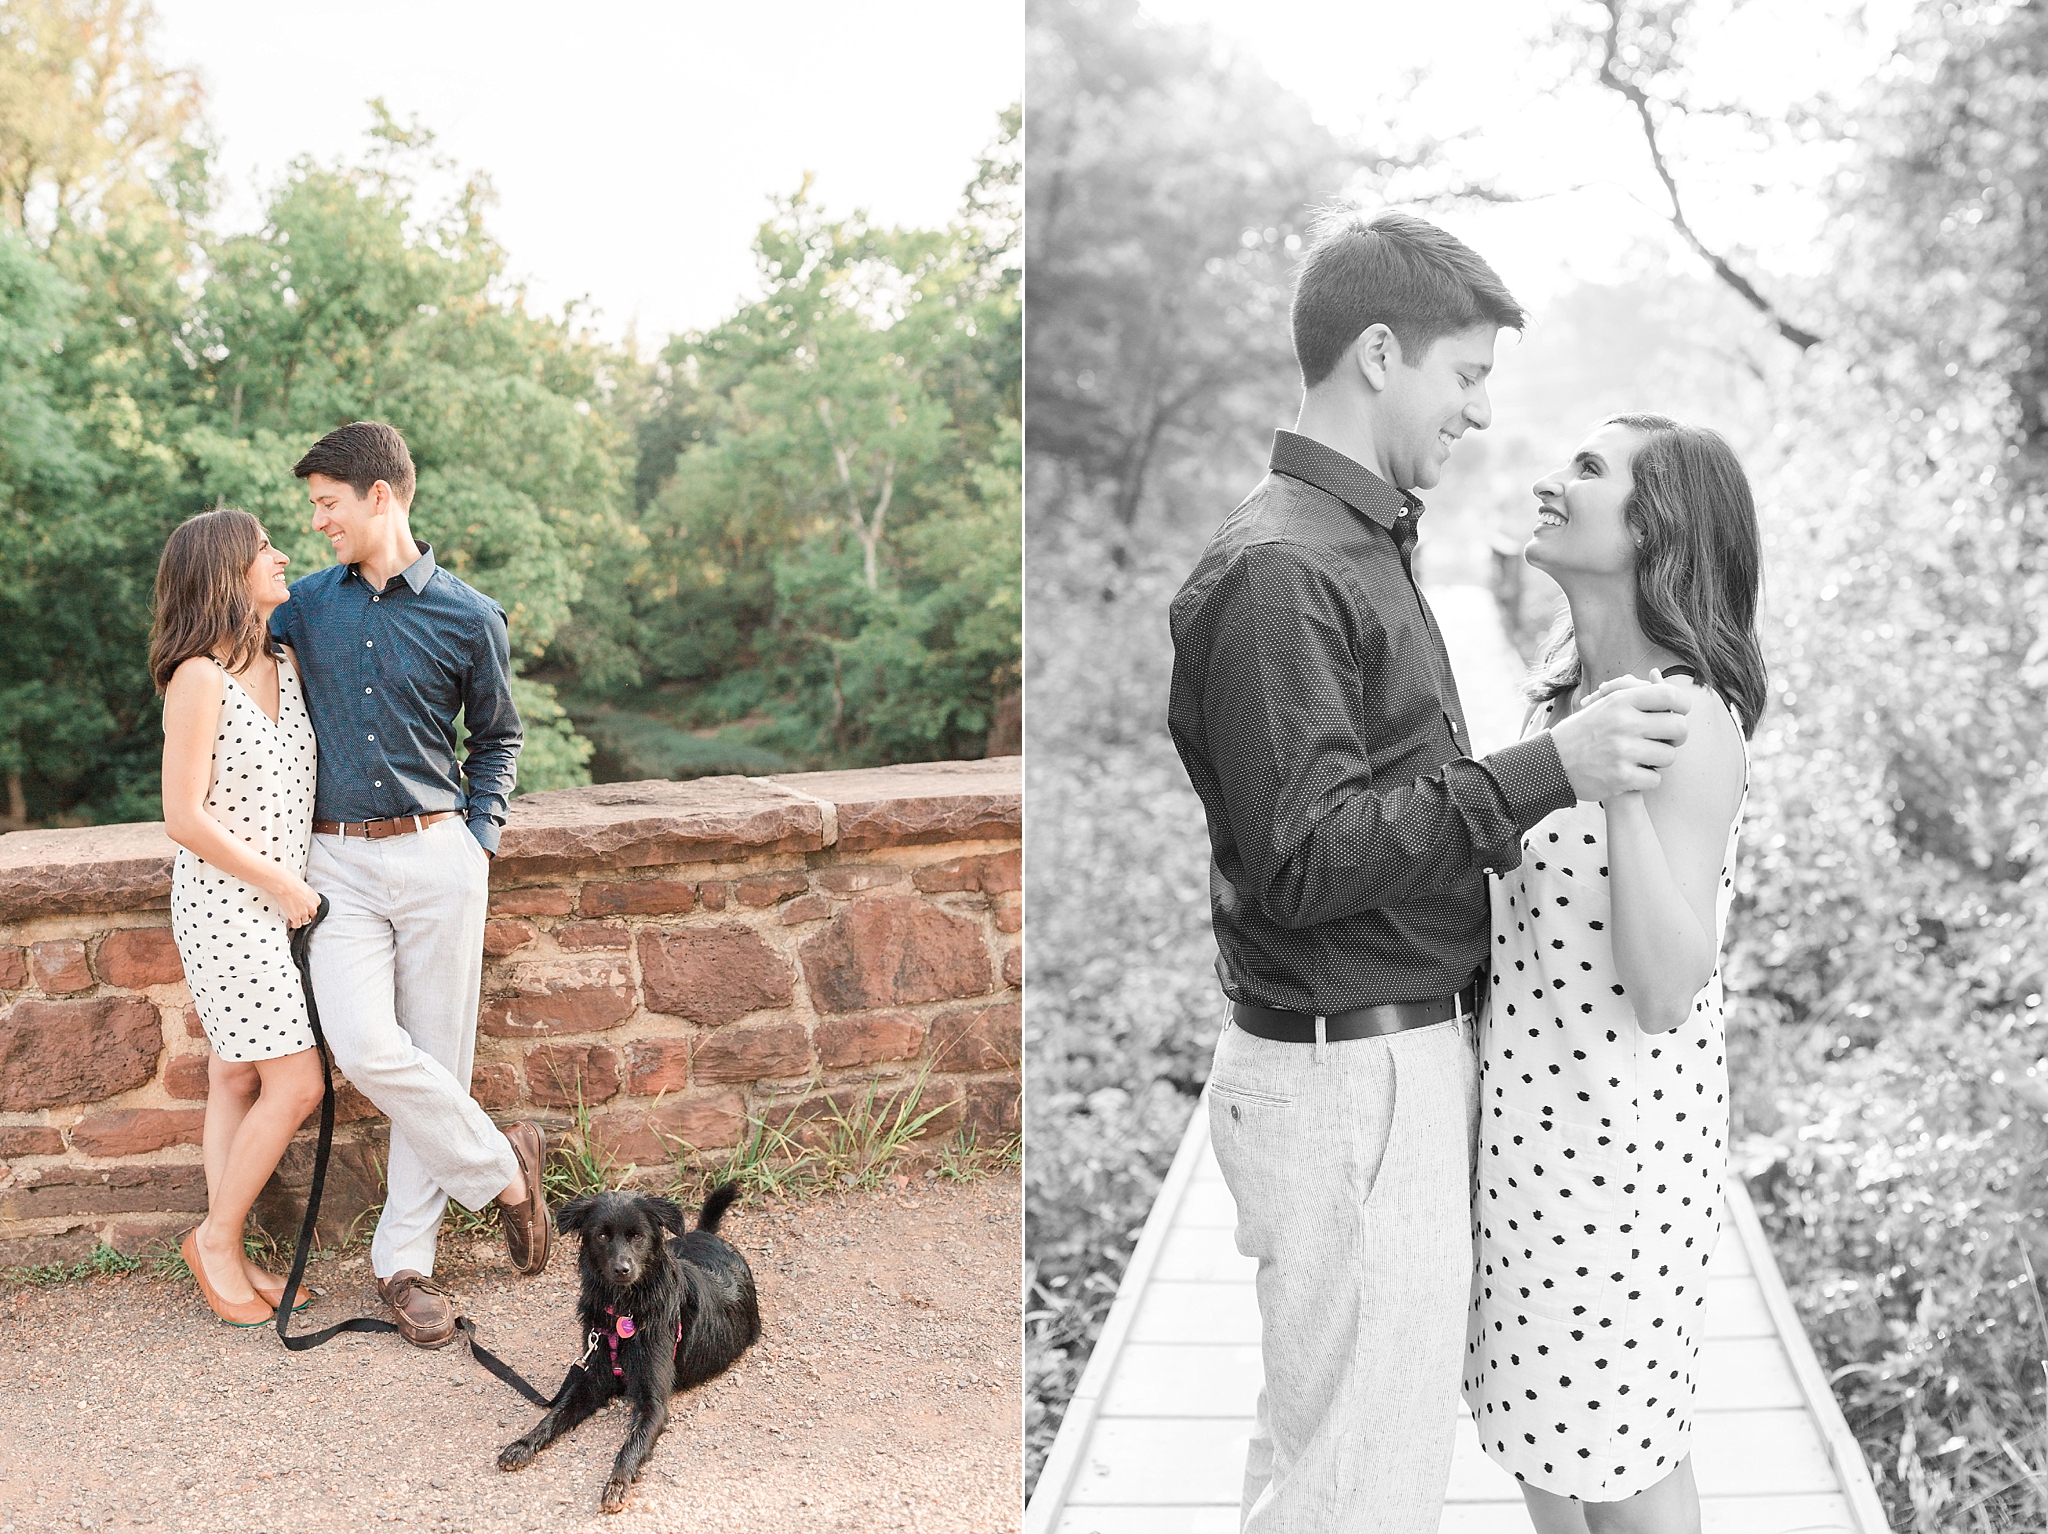 A sunrise anniversary session at Manassas Battlefield Park features a stylish couple and their adorable puppy! 